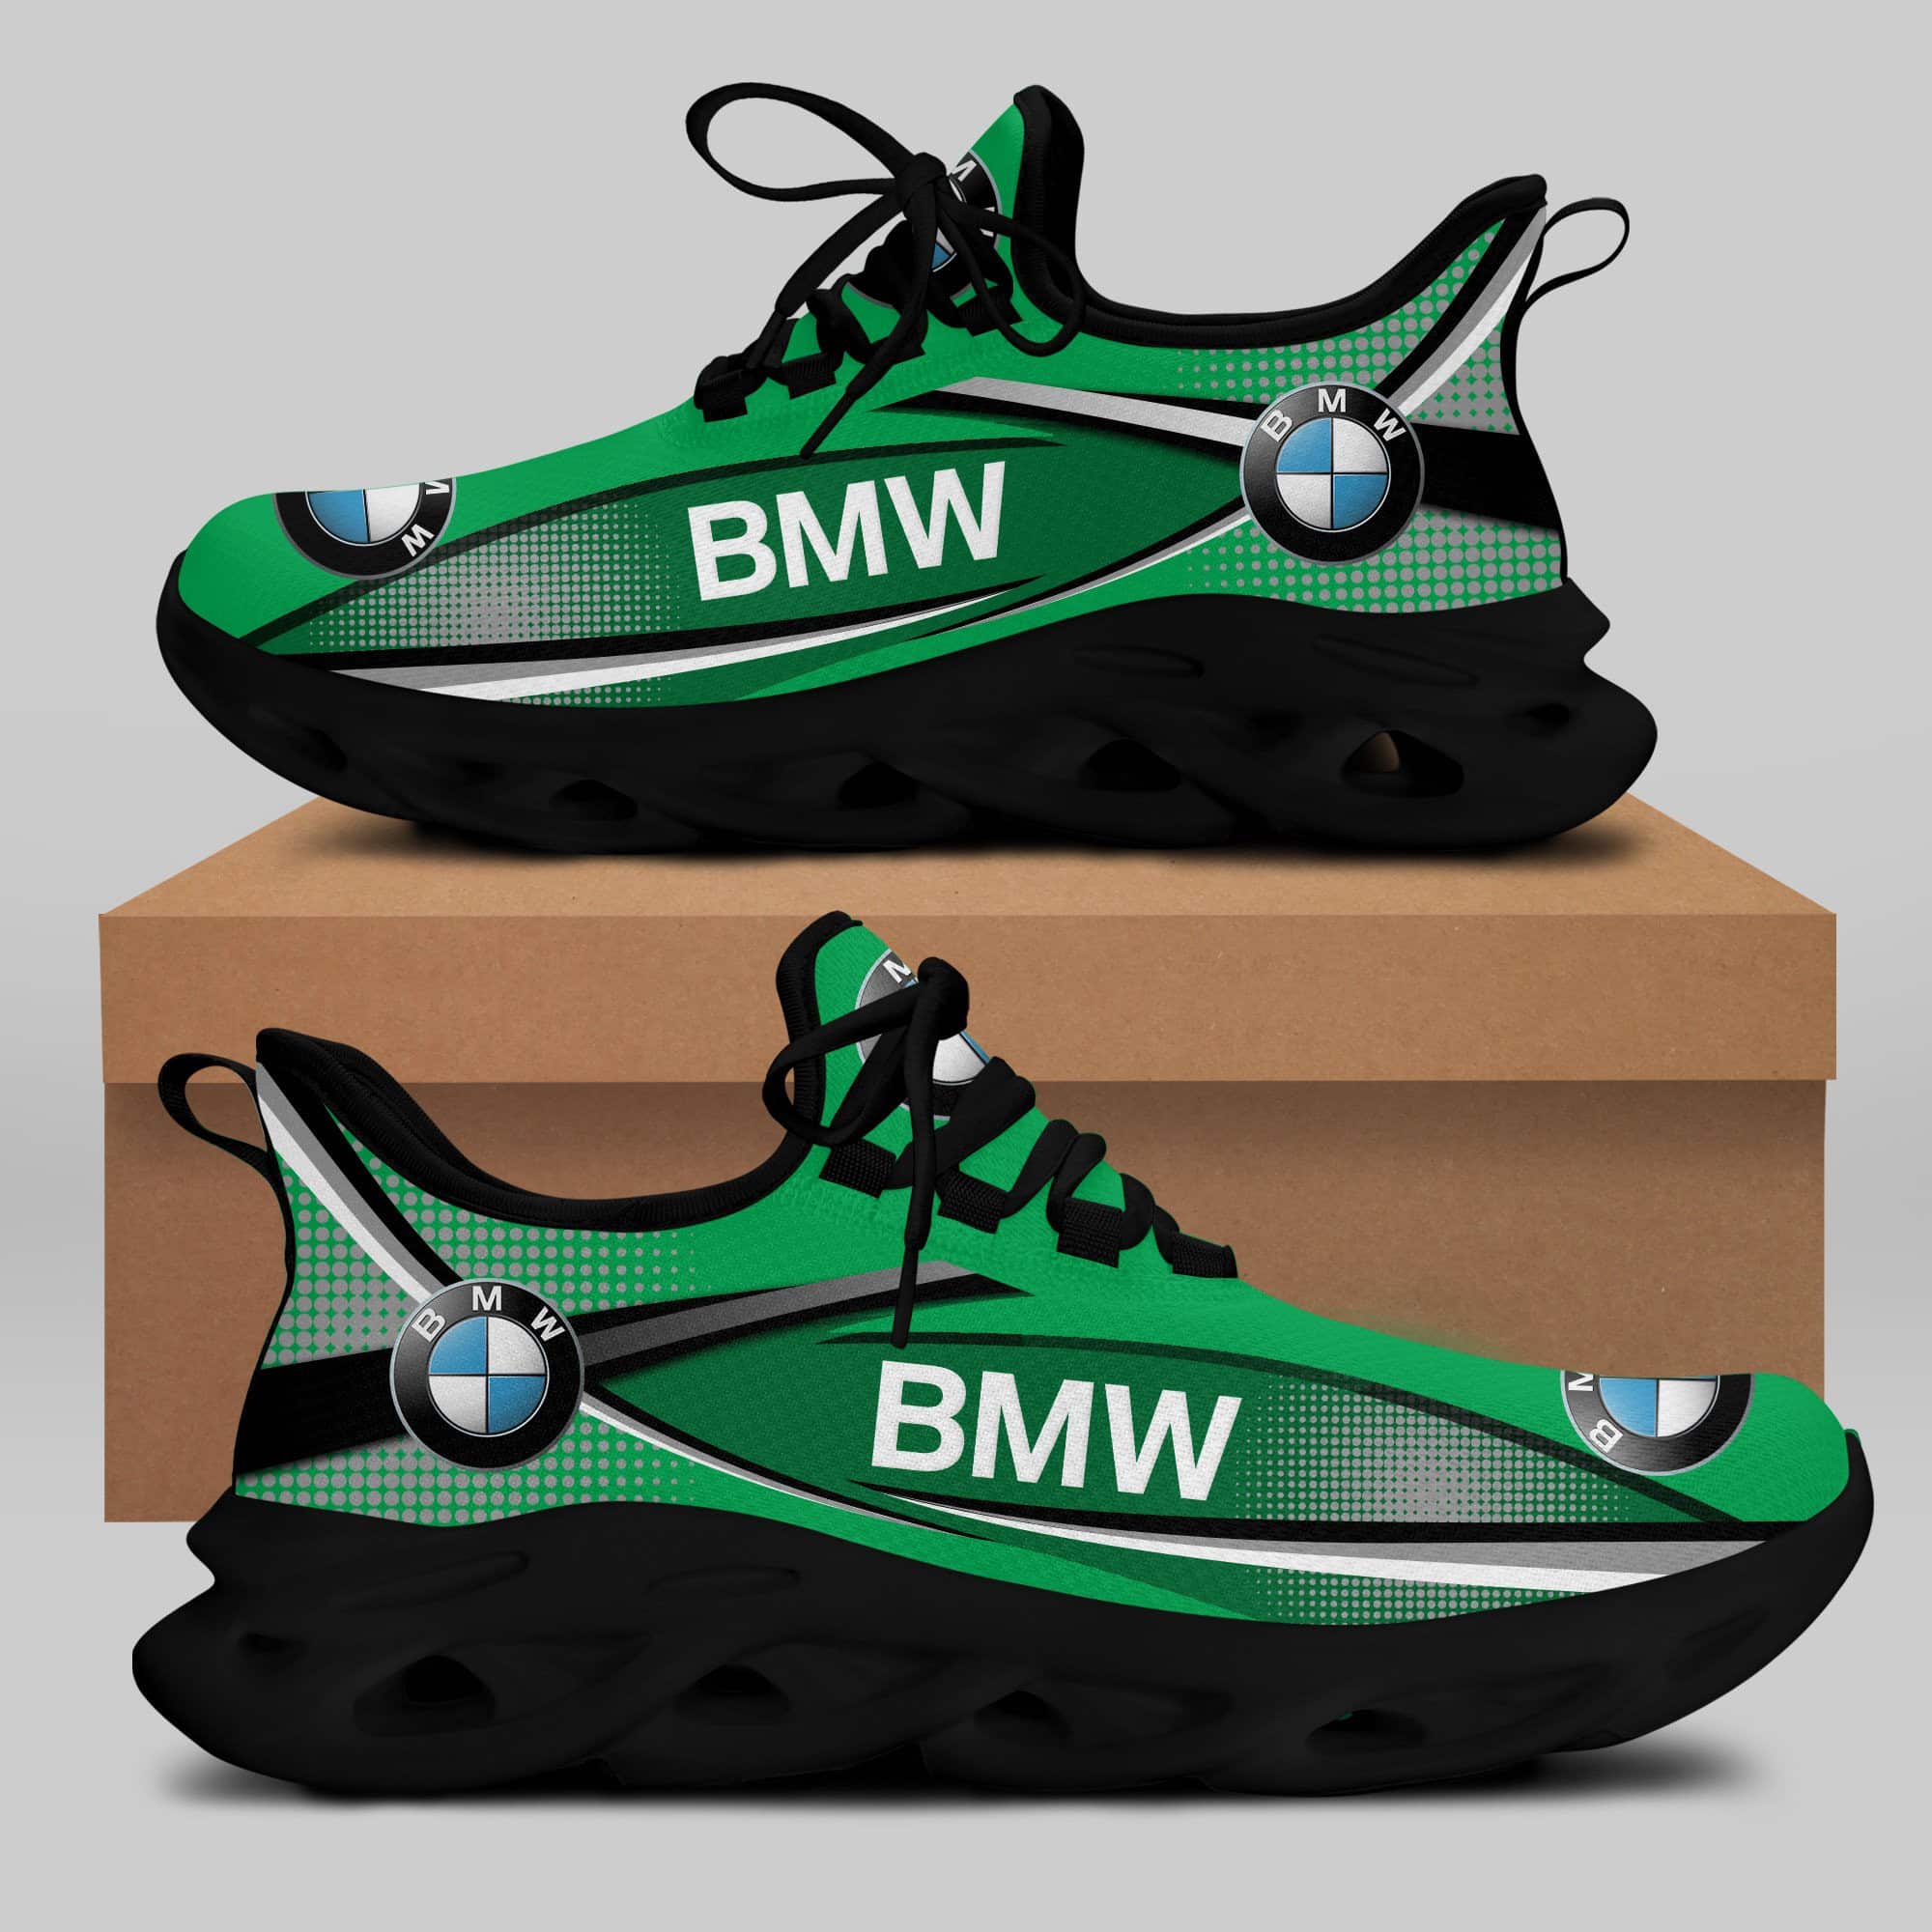 Bmw Running Shoes Max Soul Shoes Sneakers Ver 33 1